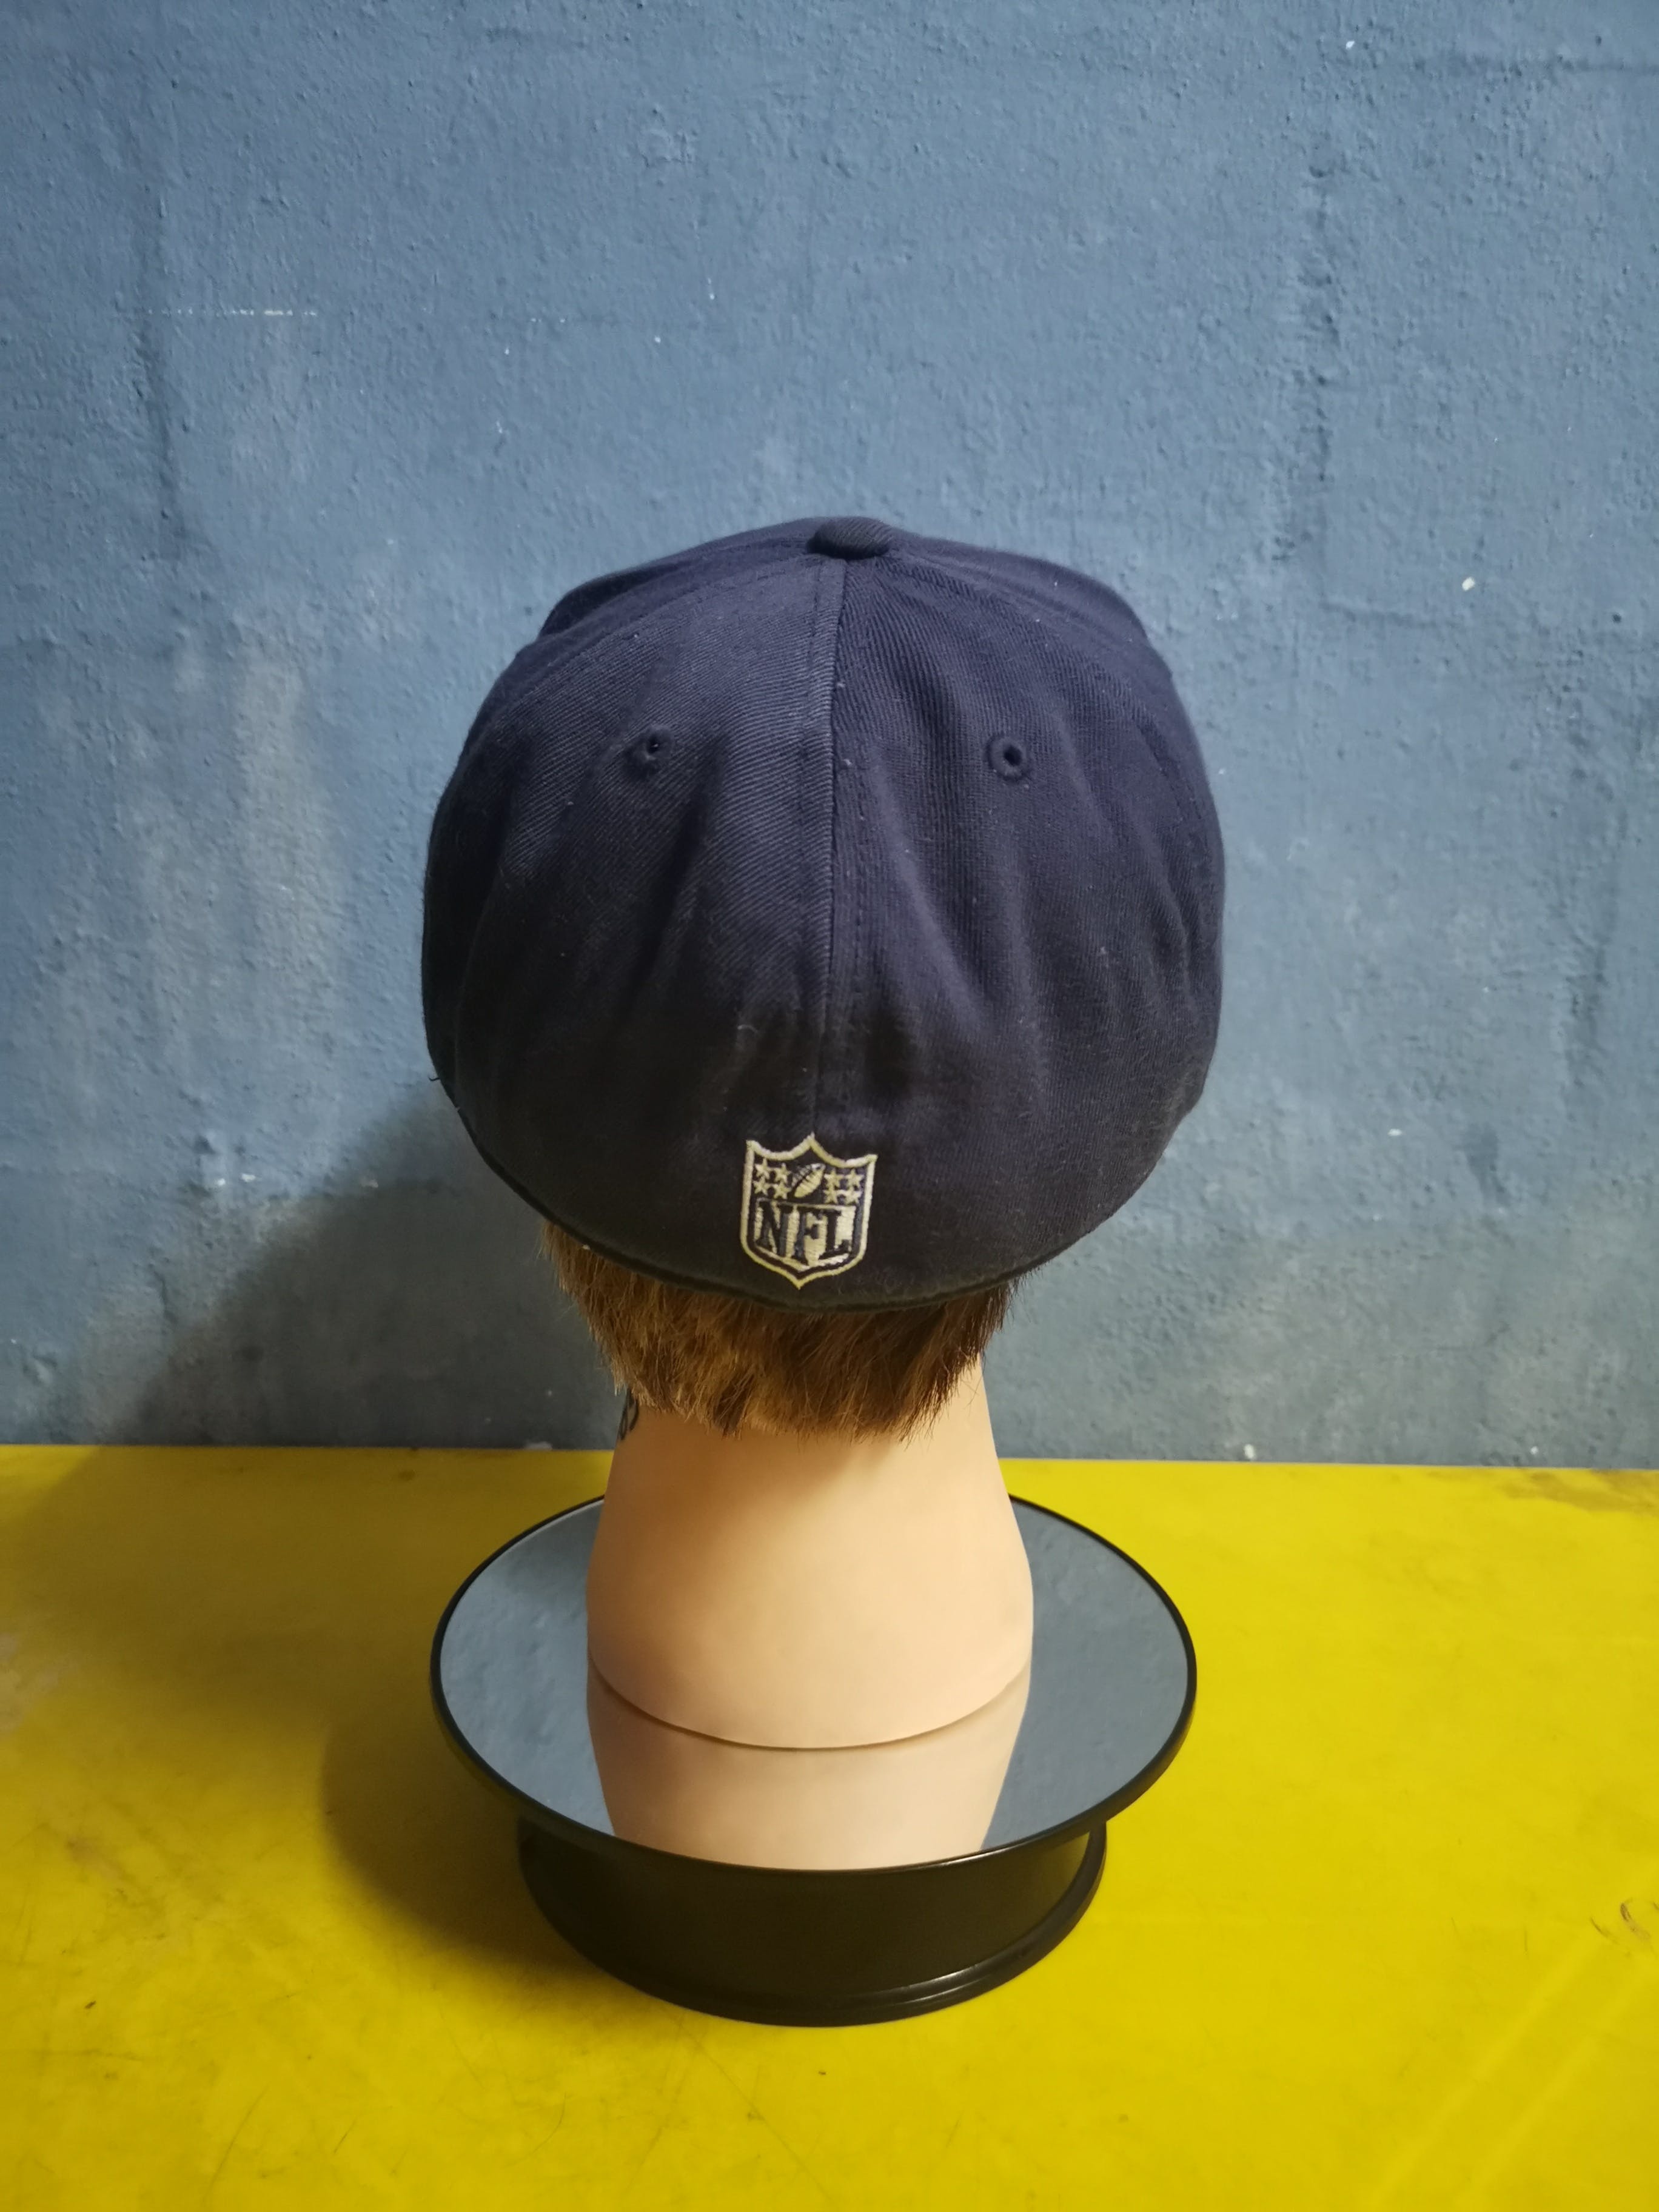 NFL Fullcap Embroidery By Team Apparel Reebok - 7